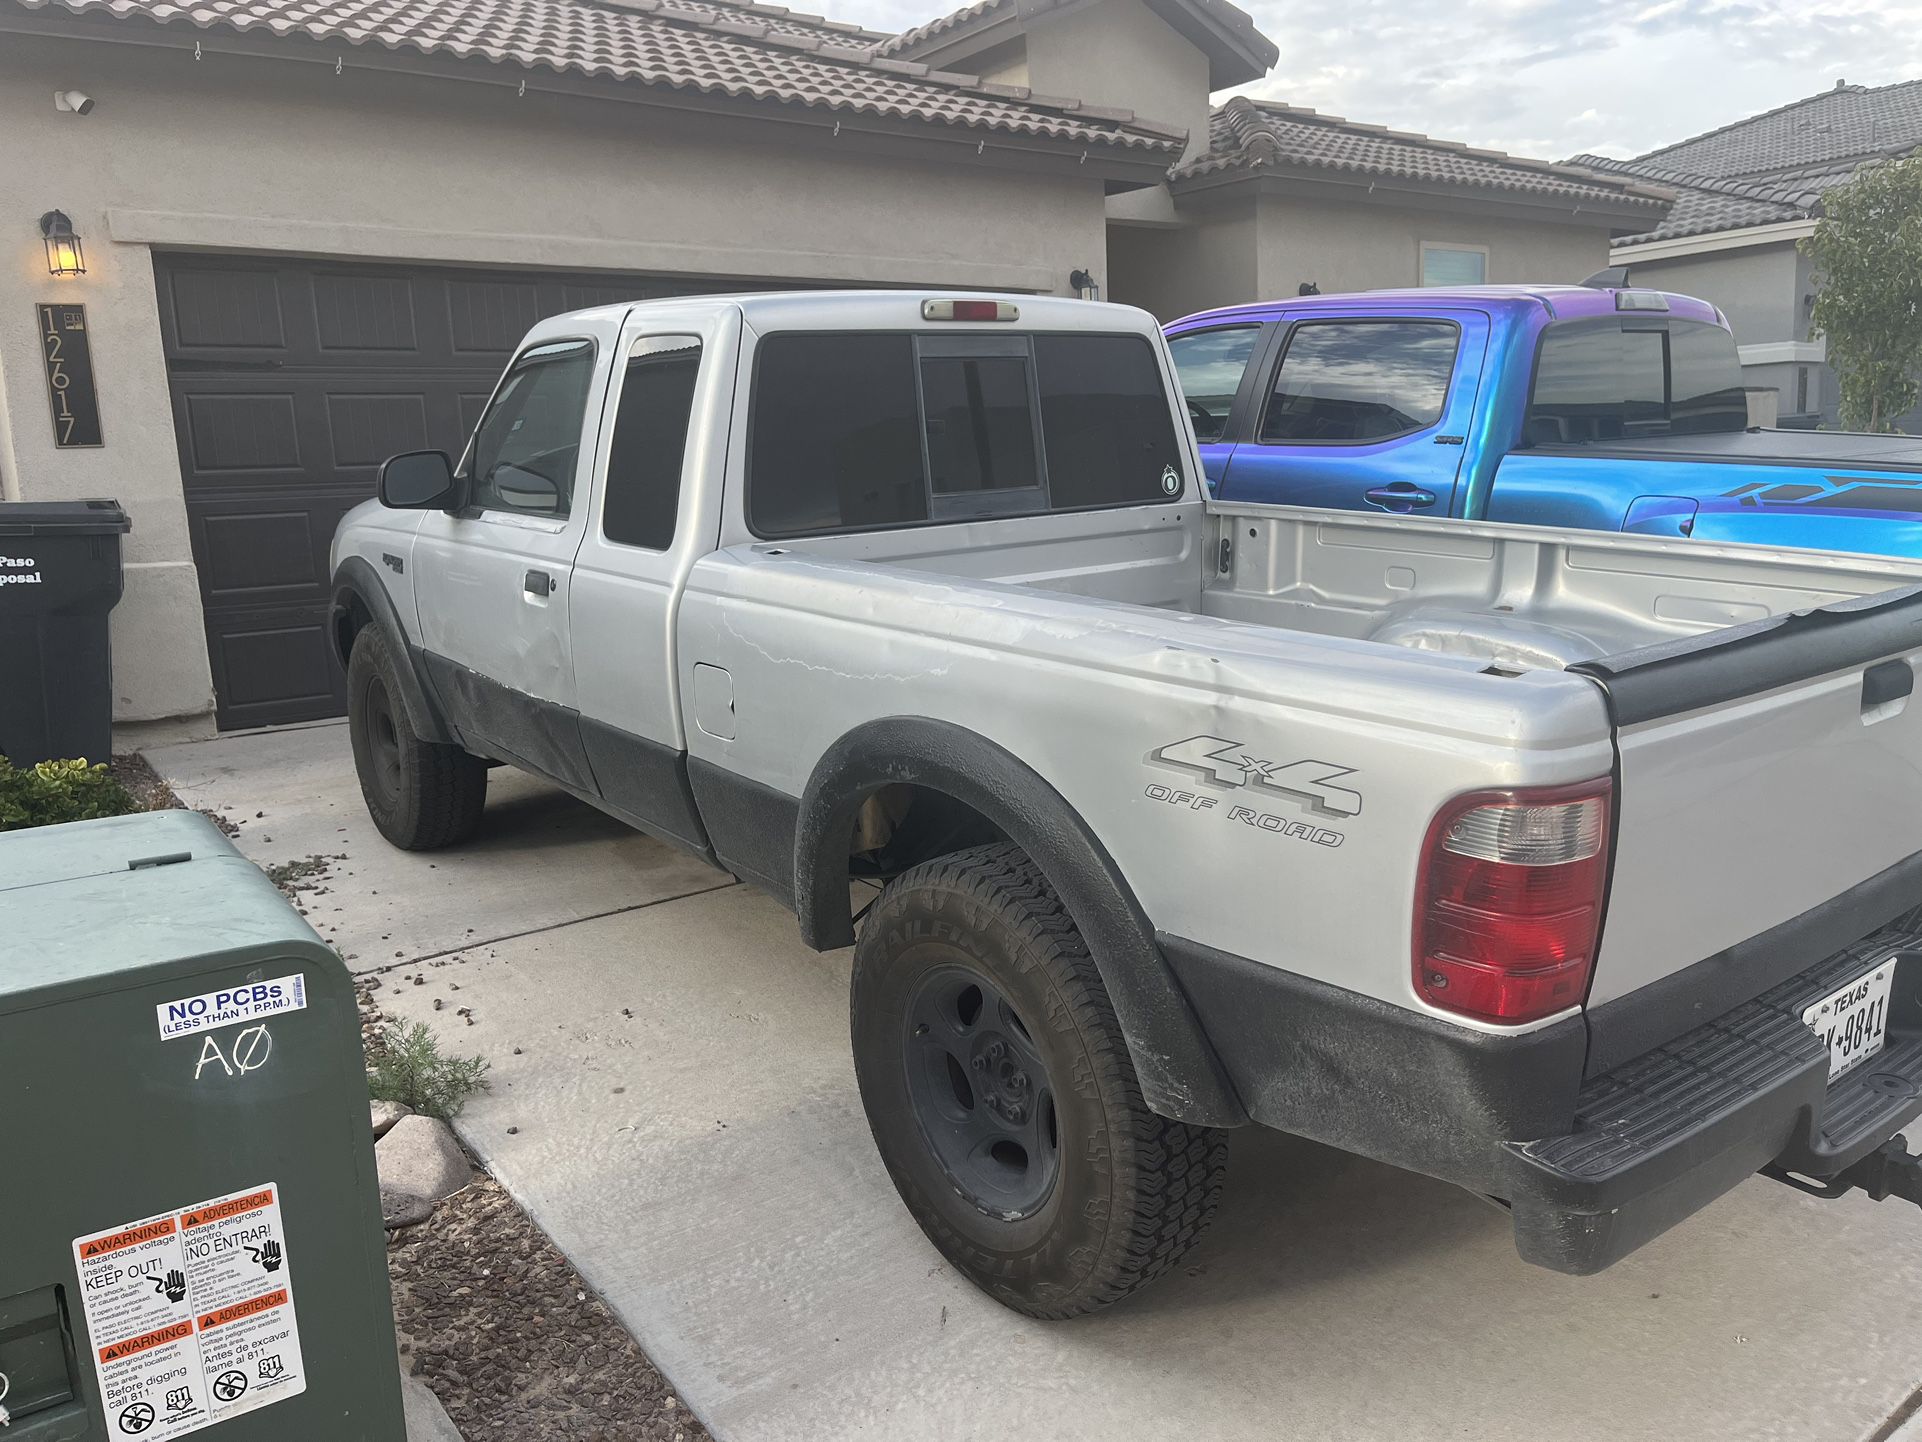 2001 Ford Ranger for Sale in El Paso, TX - OfferUp